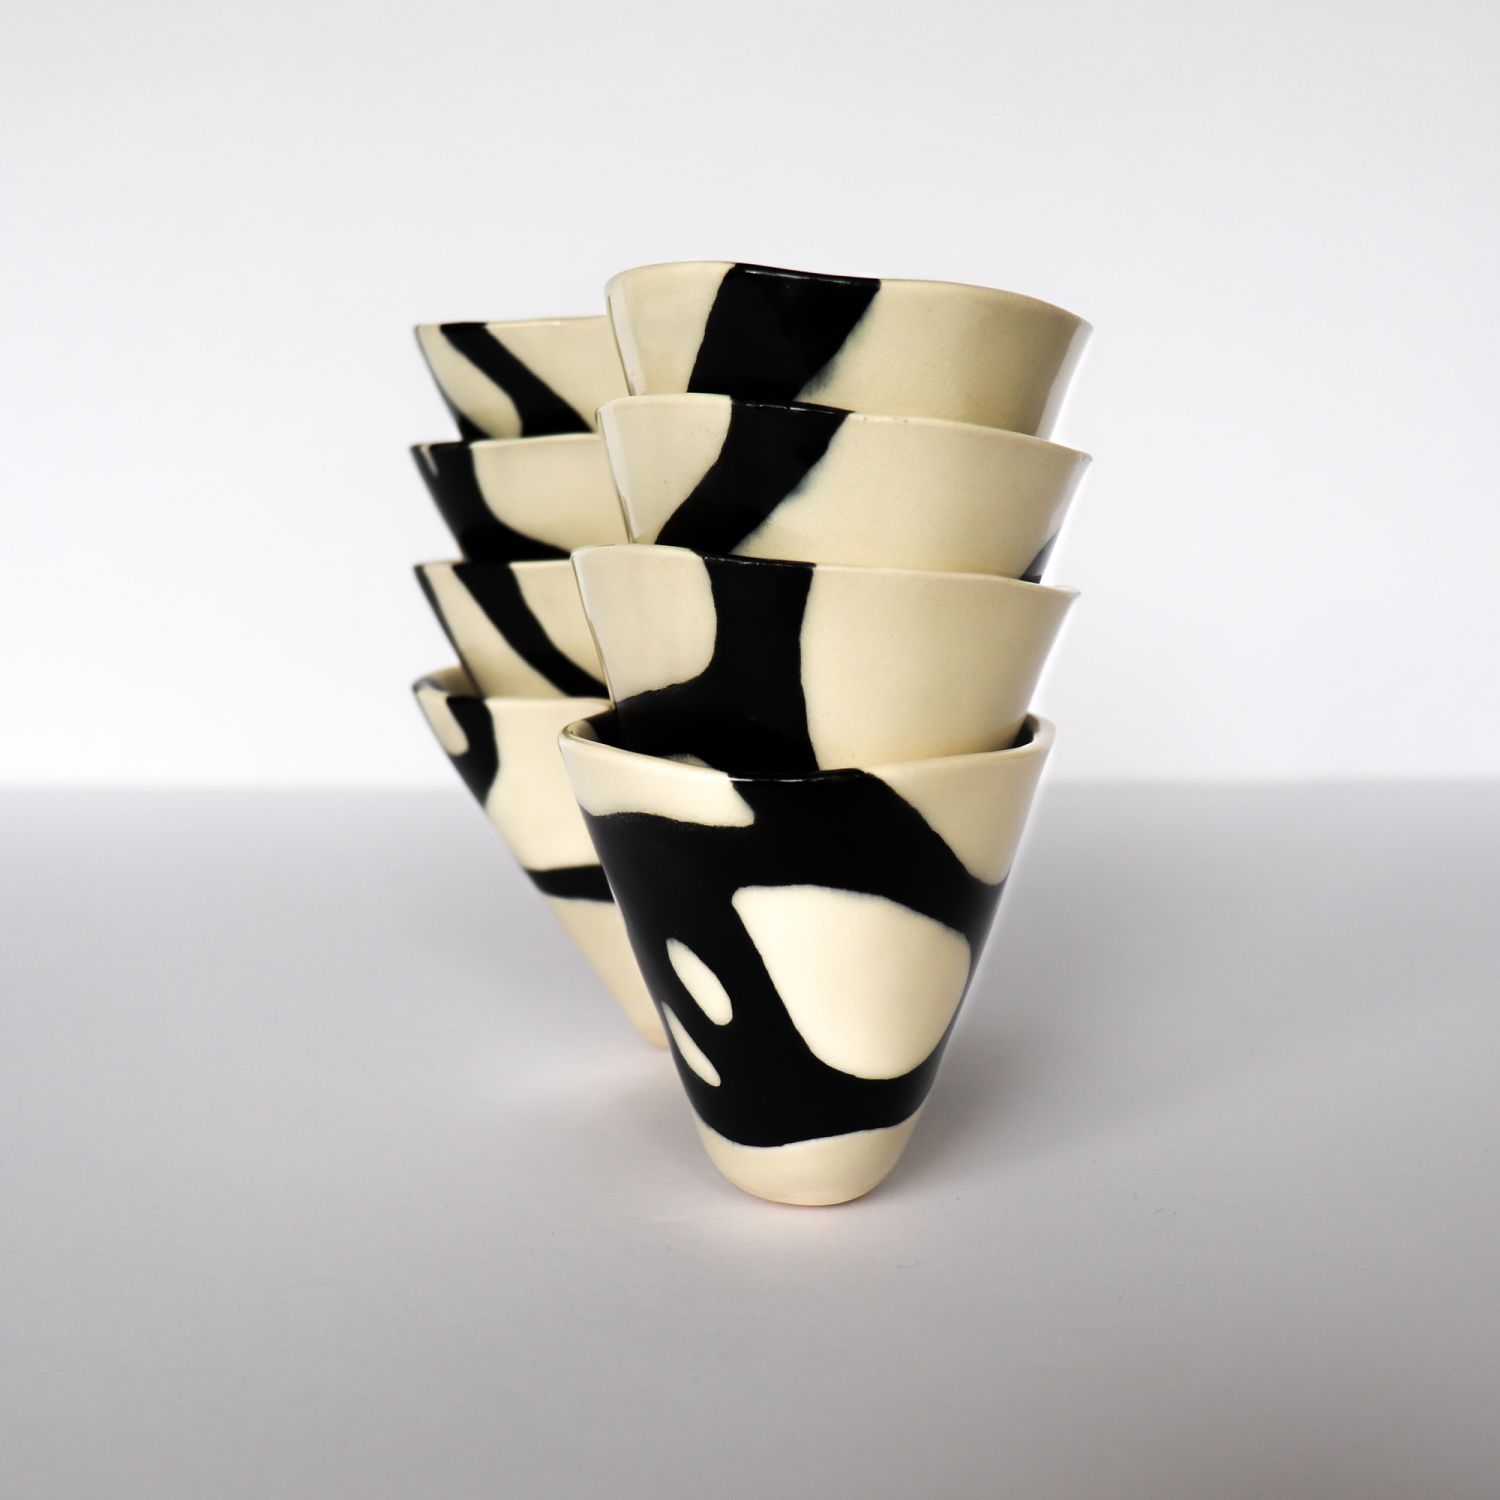 Alana Marcoccia: Interconnected Sculptural Bowl Product Image 3 of 13